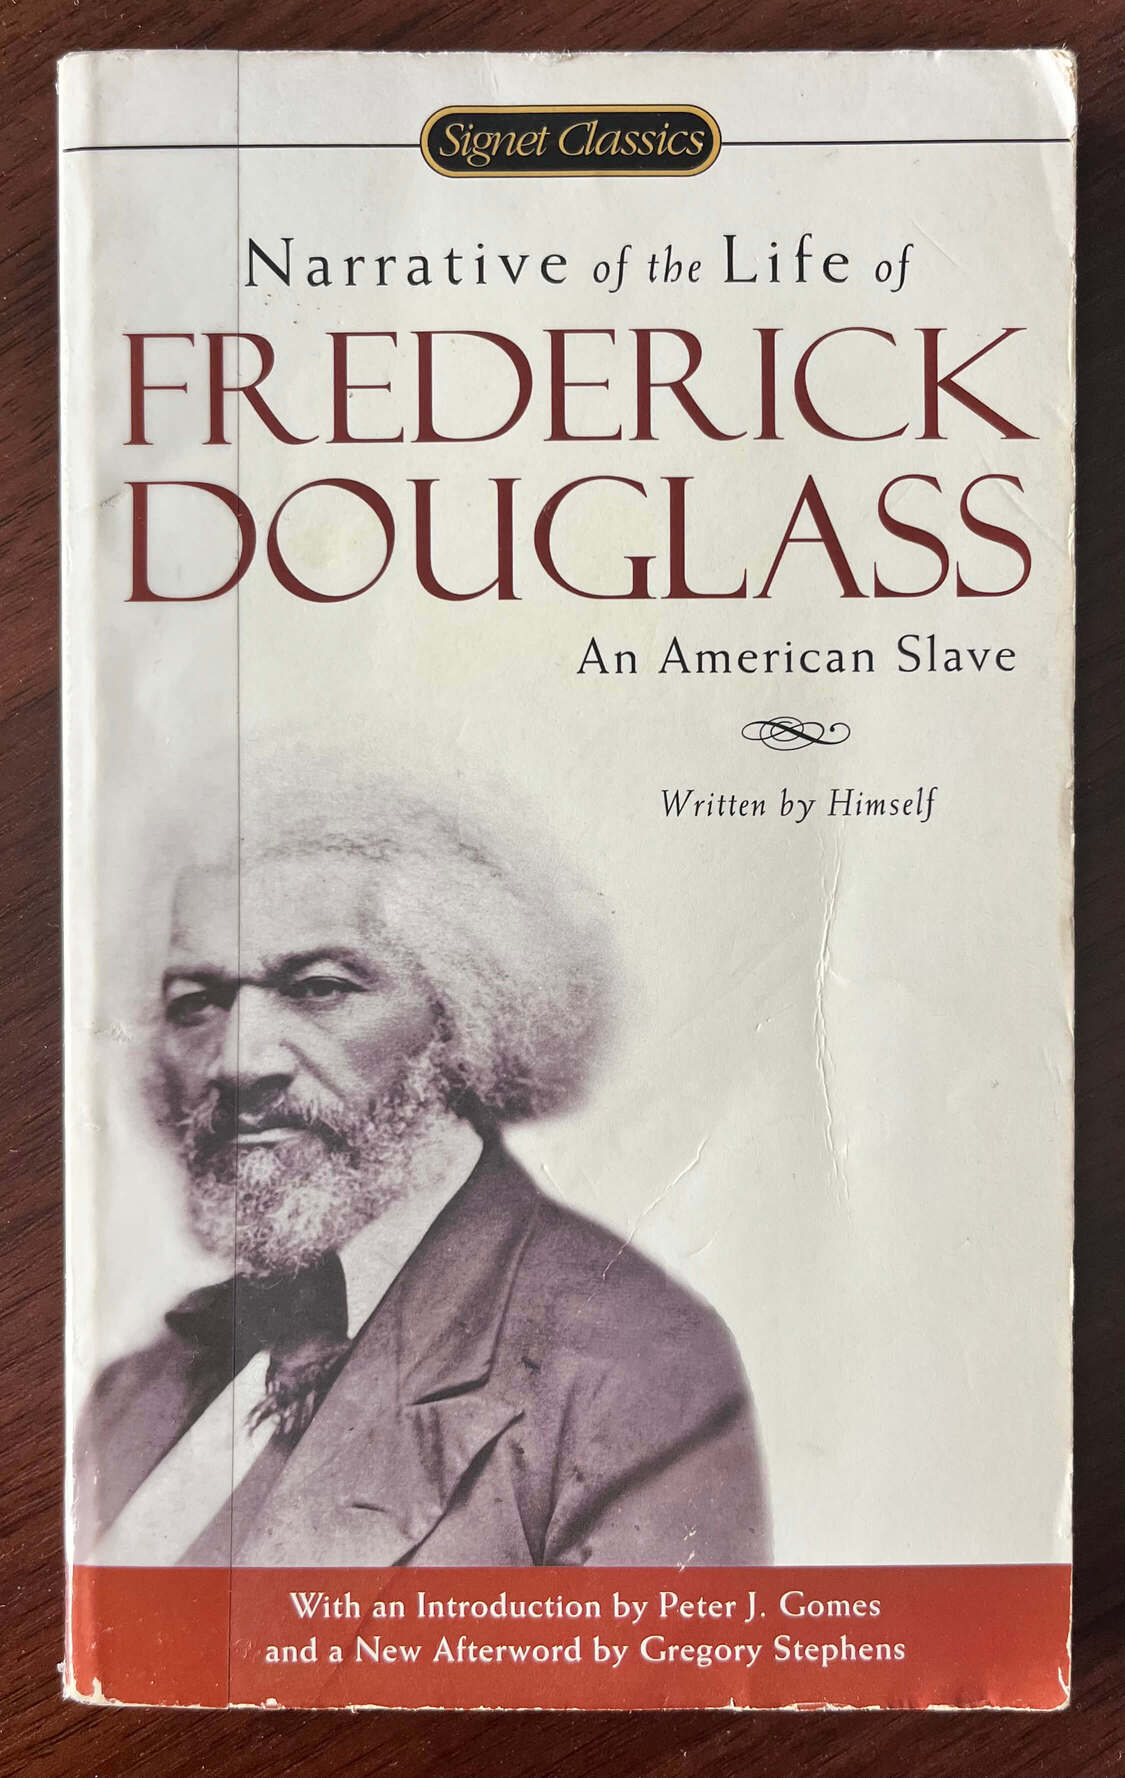 “Narrative of the Life of Fredrerick Douglass: An American Slave” Written by Himself. With an introduction by Peter J. Gomes and a new afterword by Gregory Stephens.